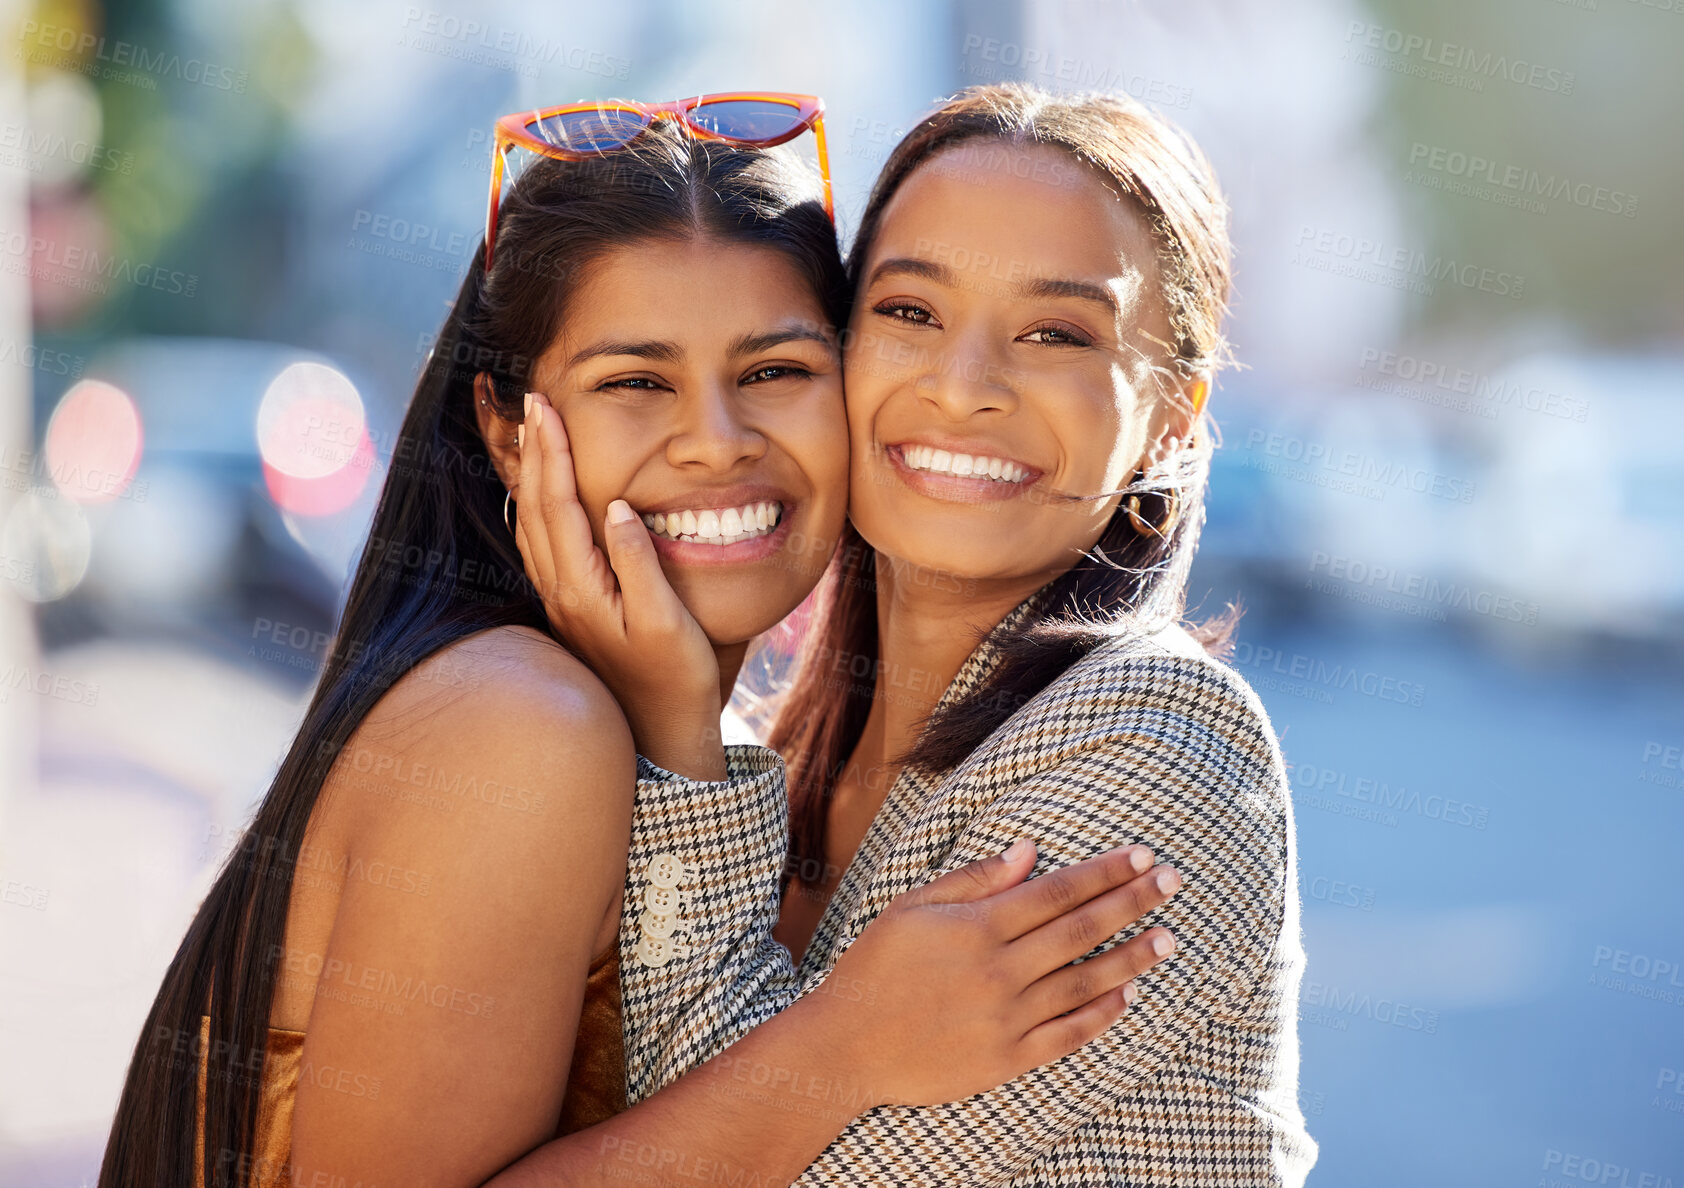 Buy stock photo Cropped portrait of two attractive young girlfriends hugging while out on the town